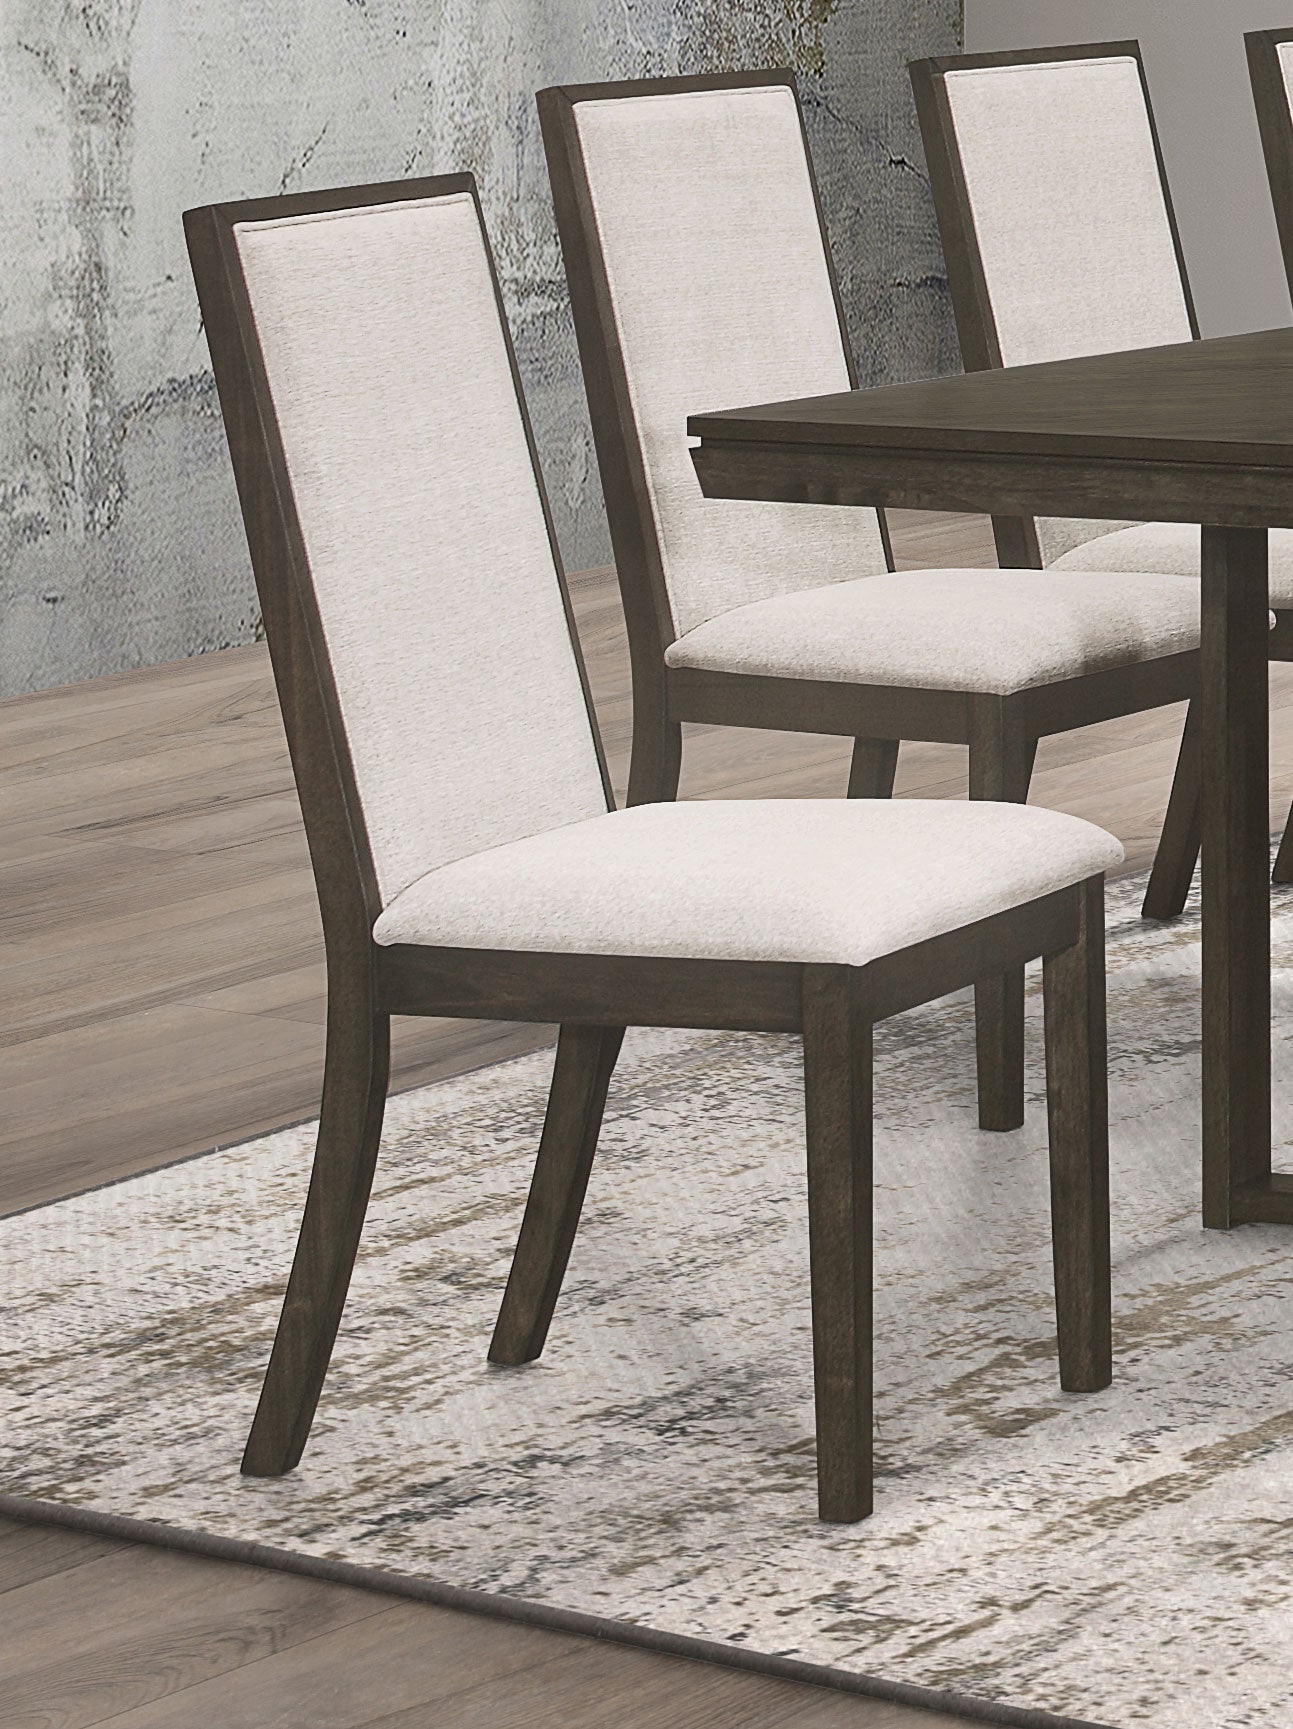 Kelly Upholstered Solid Back Dining Side Chair Beige and Dark Grey (Set of 2)